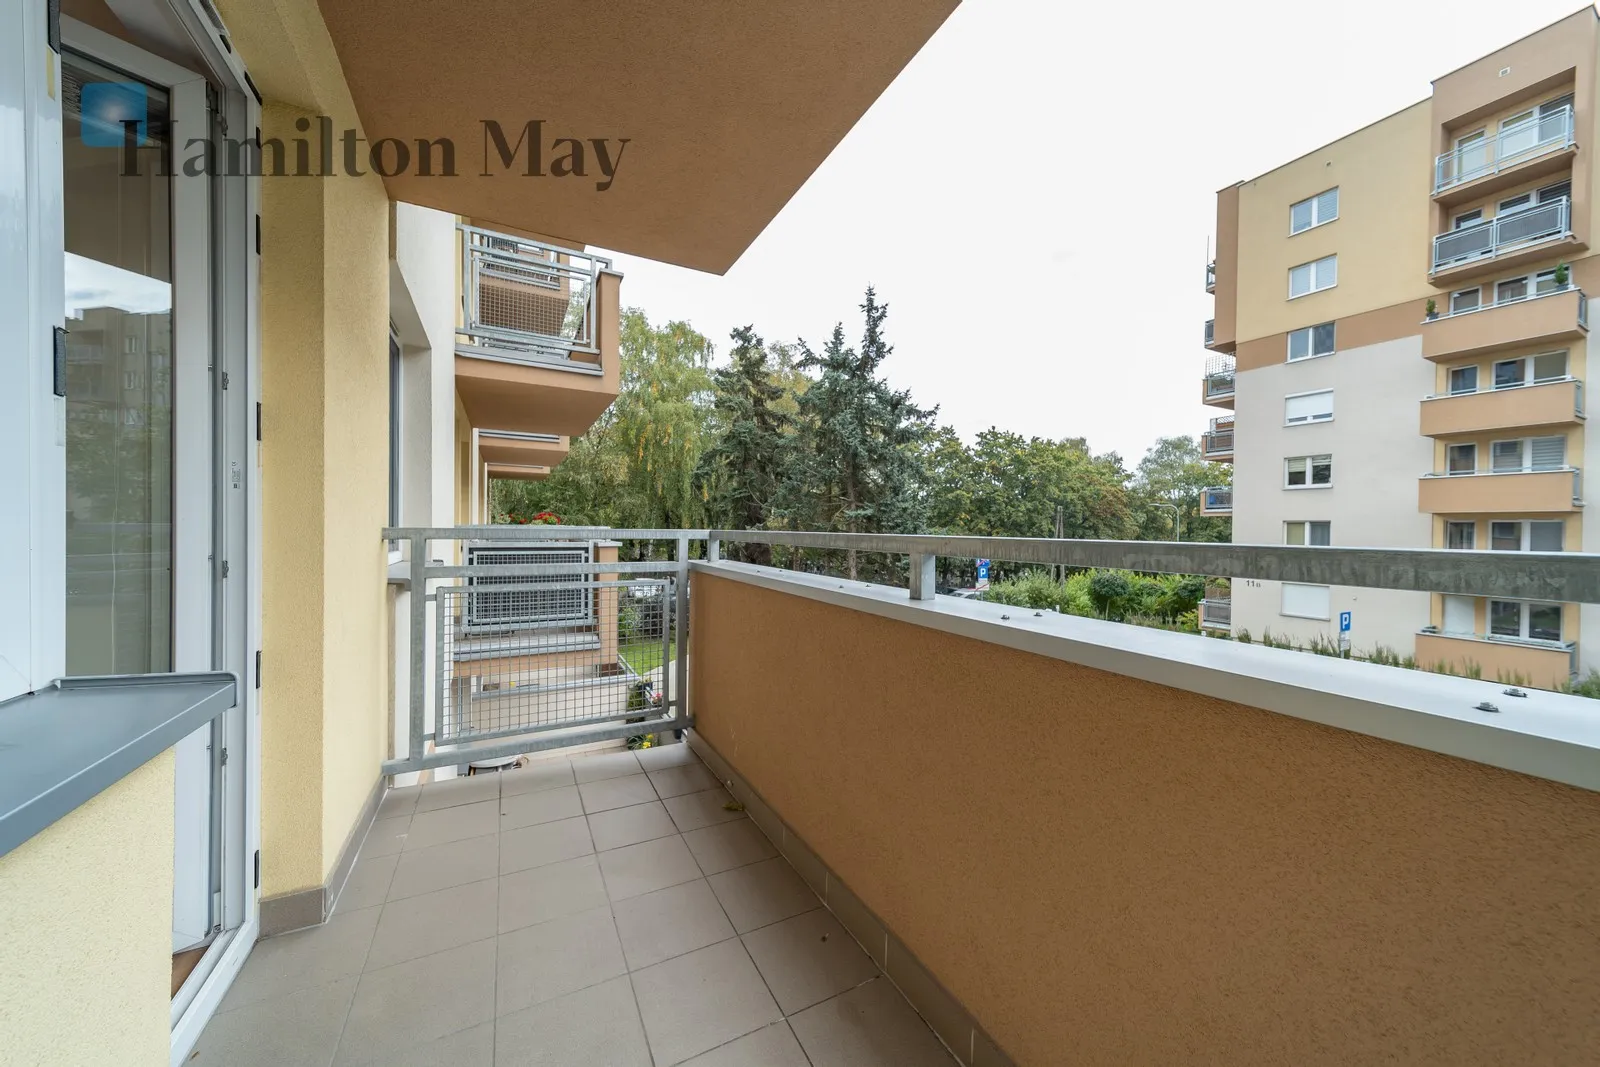 Distance to centre: 4.69 km Level: 1 Price: 2500 PLN Bedrooms: 1